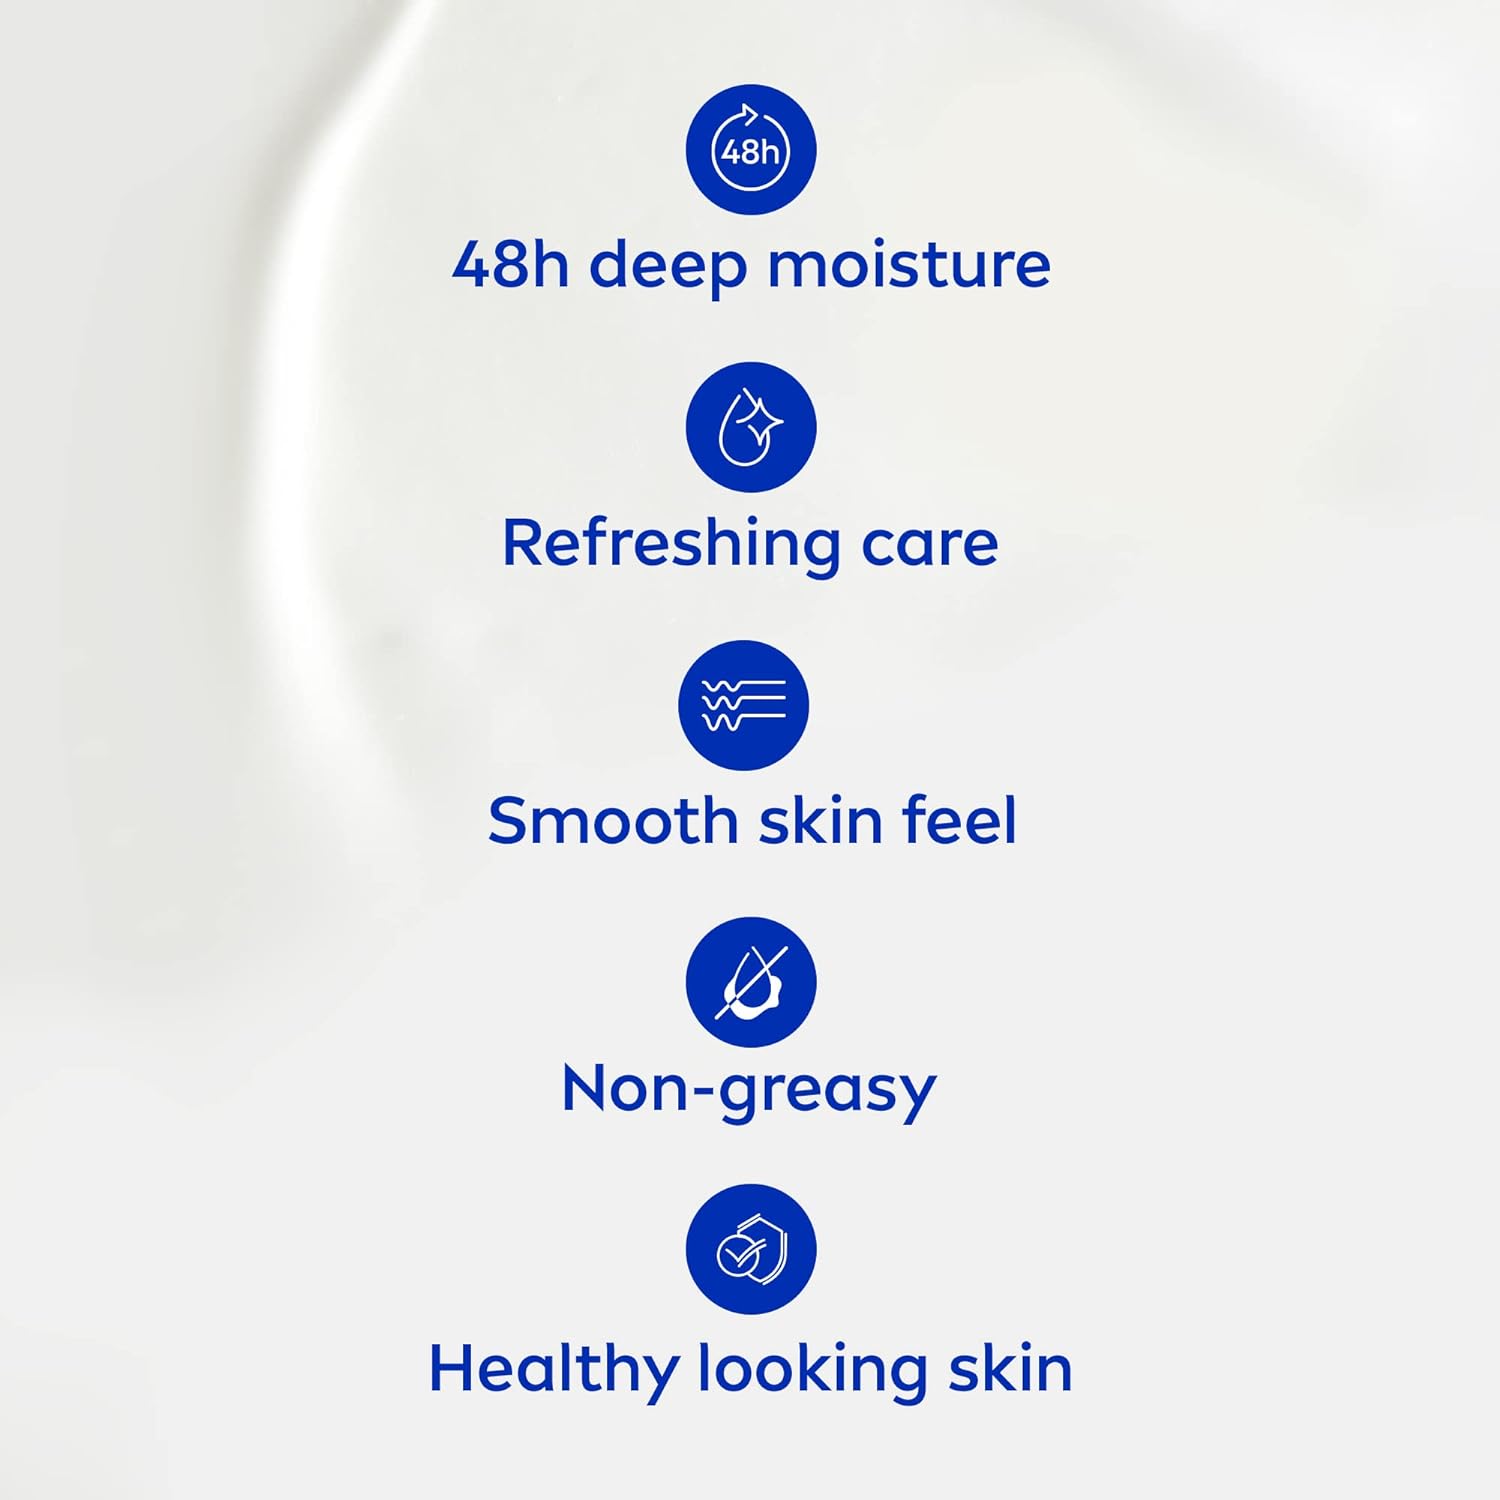 NIVEA Body Lotion Moisturizer for Normal to Dry Skin, 48h Moisture Care, Soothing Aloe Vera Hydration, 625ml - Packaging May Vary